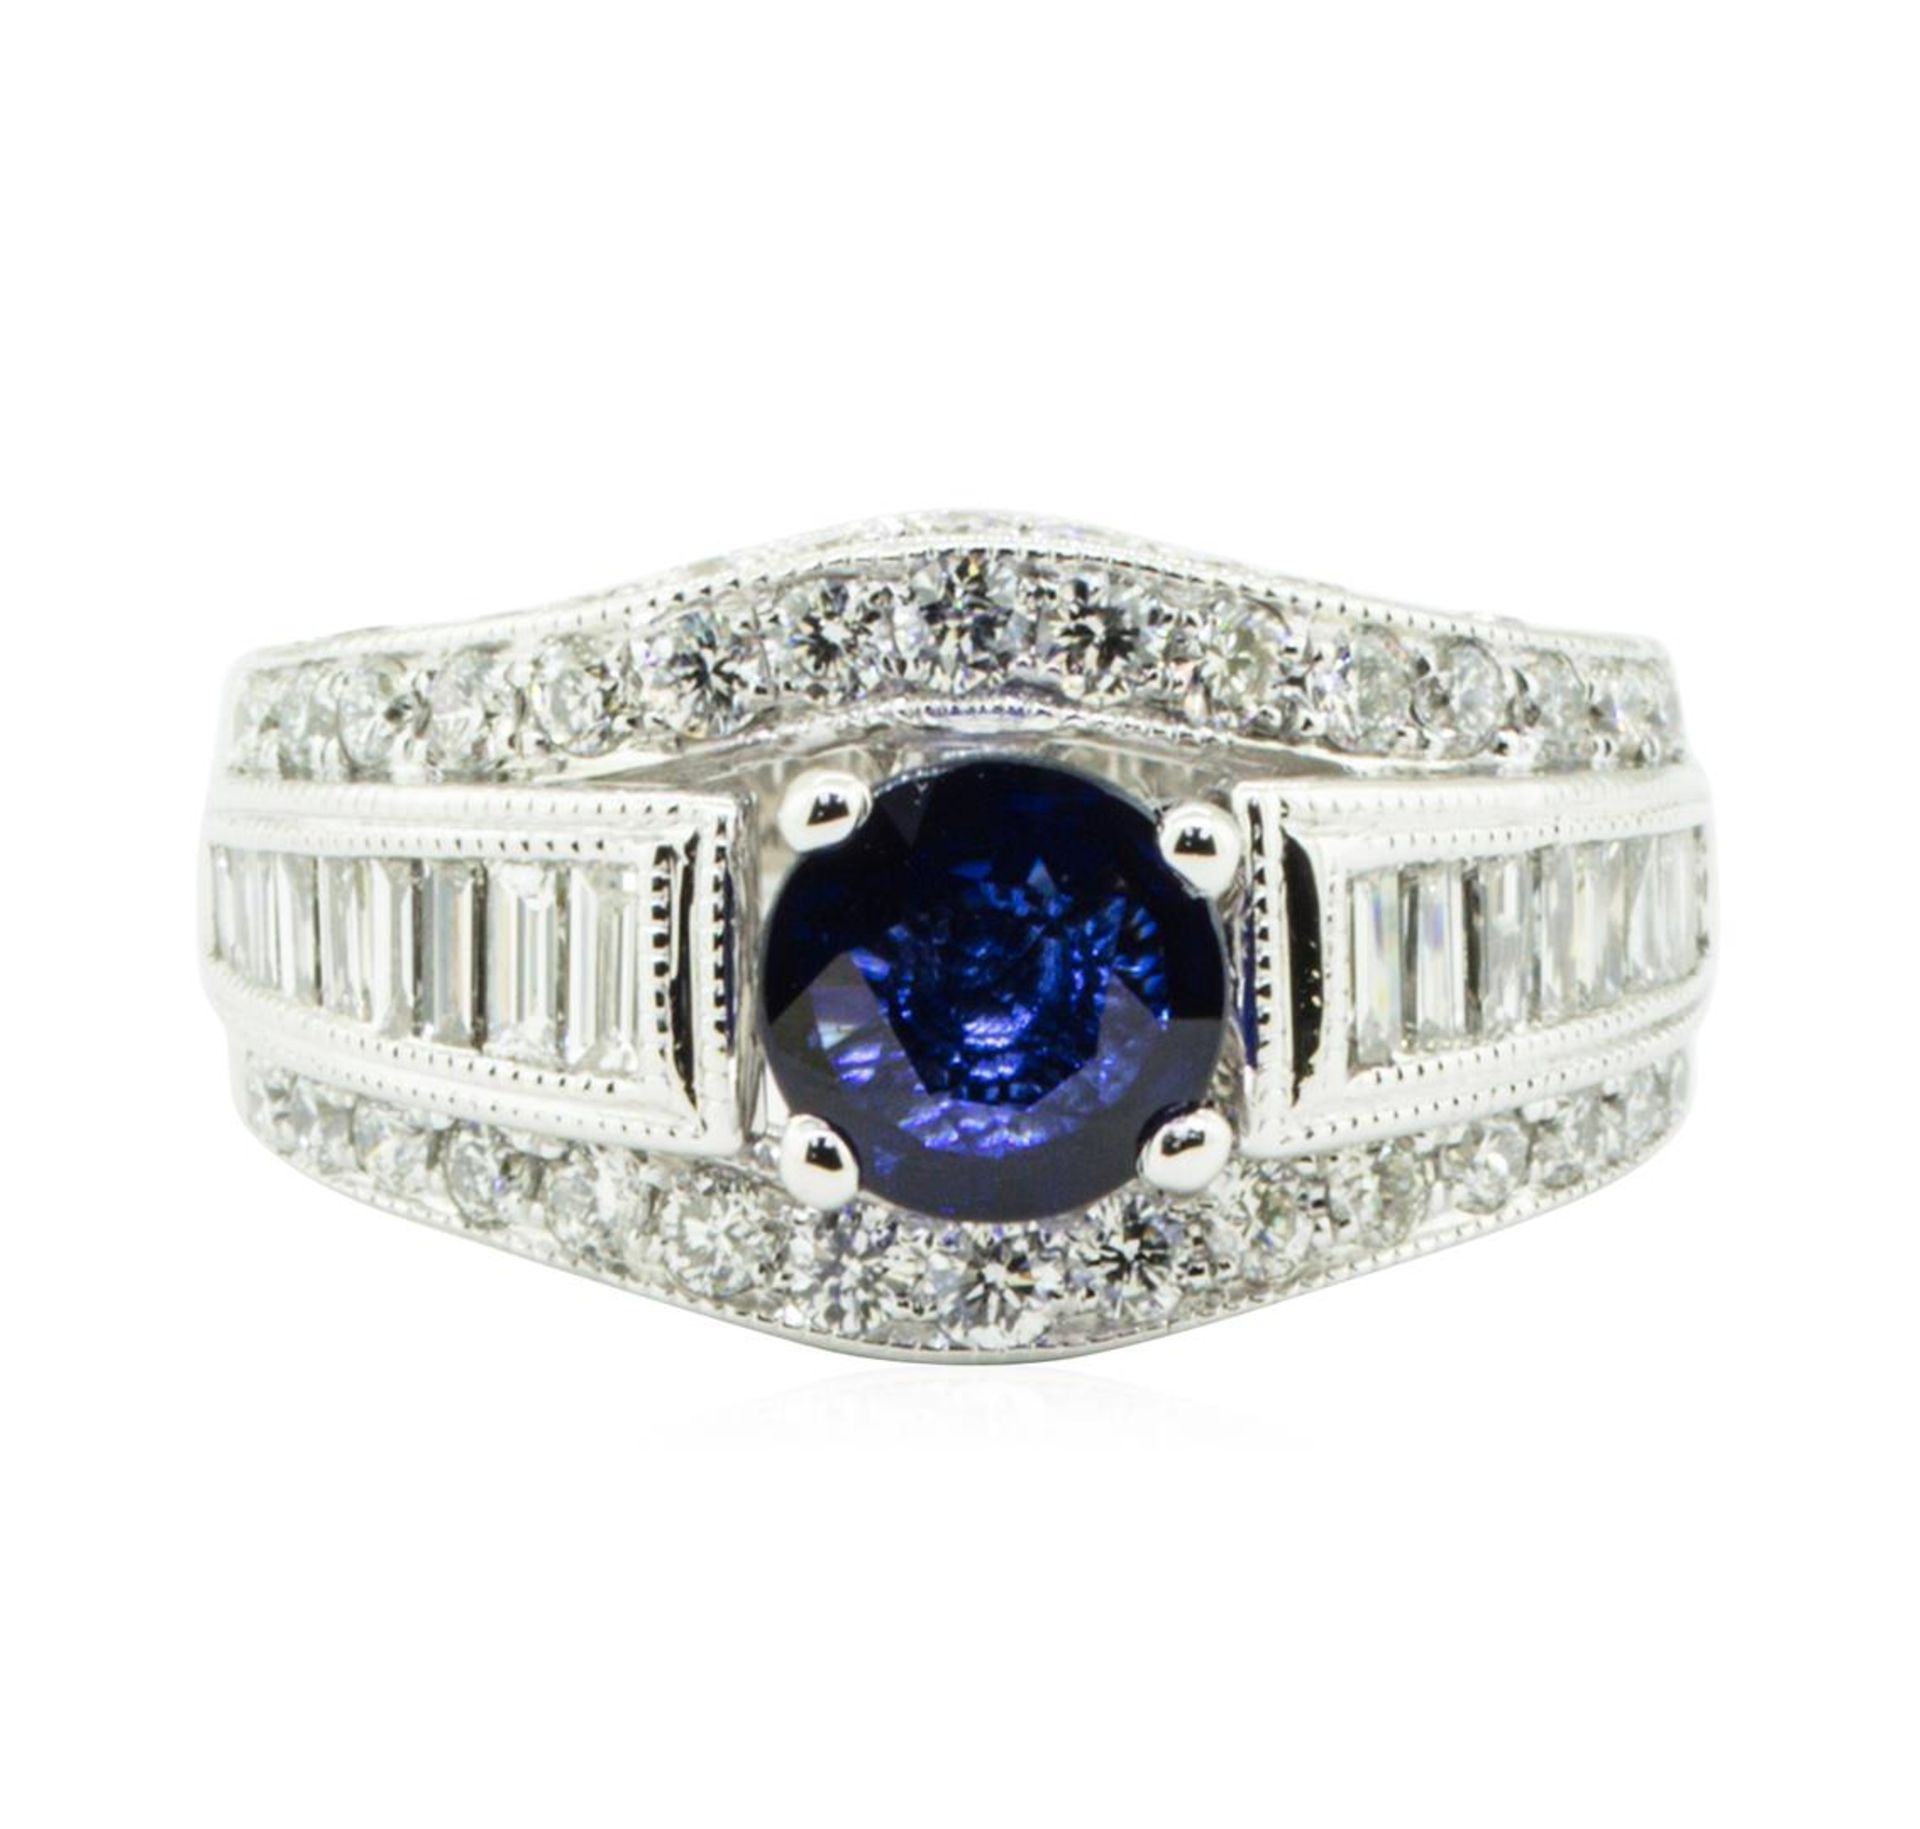 2.49 ctw Round Brilliant Blue Sapphire And Diamond Ring - 14KT White Gold - Image 2 of 5